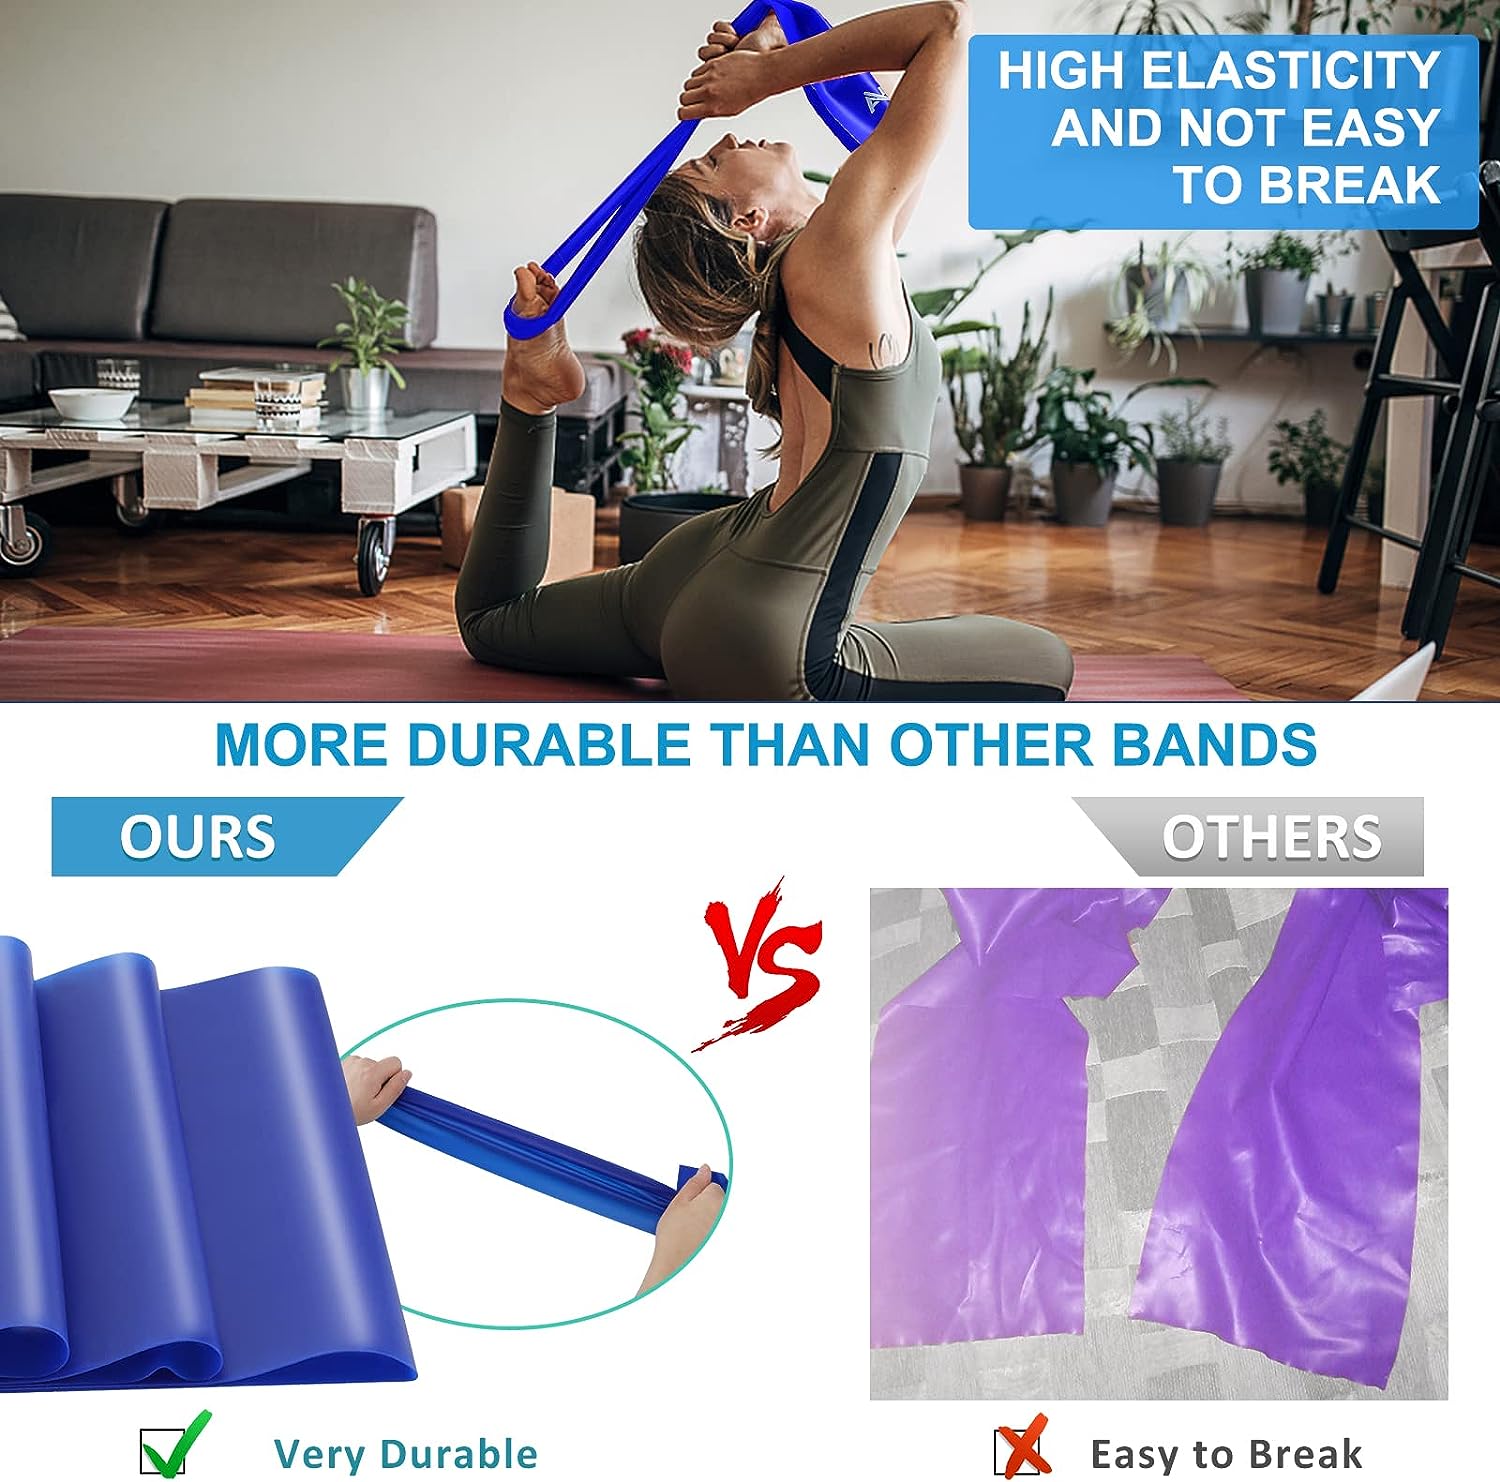 londys Resistance Bands for Working Out, Exercise Bands, Physical Therapy Equipment, 59 Inch Non-Latex Stretching Yoga Strap for Upper  Lower Body, Workouts  Rehab at Home-5 Progressive Resistance